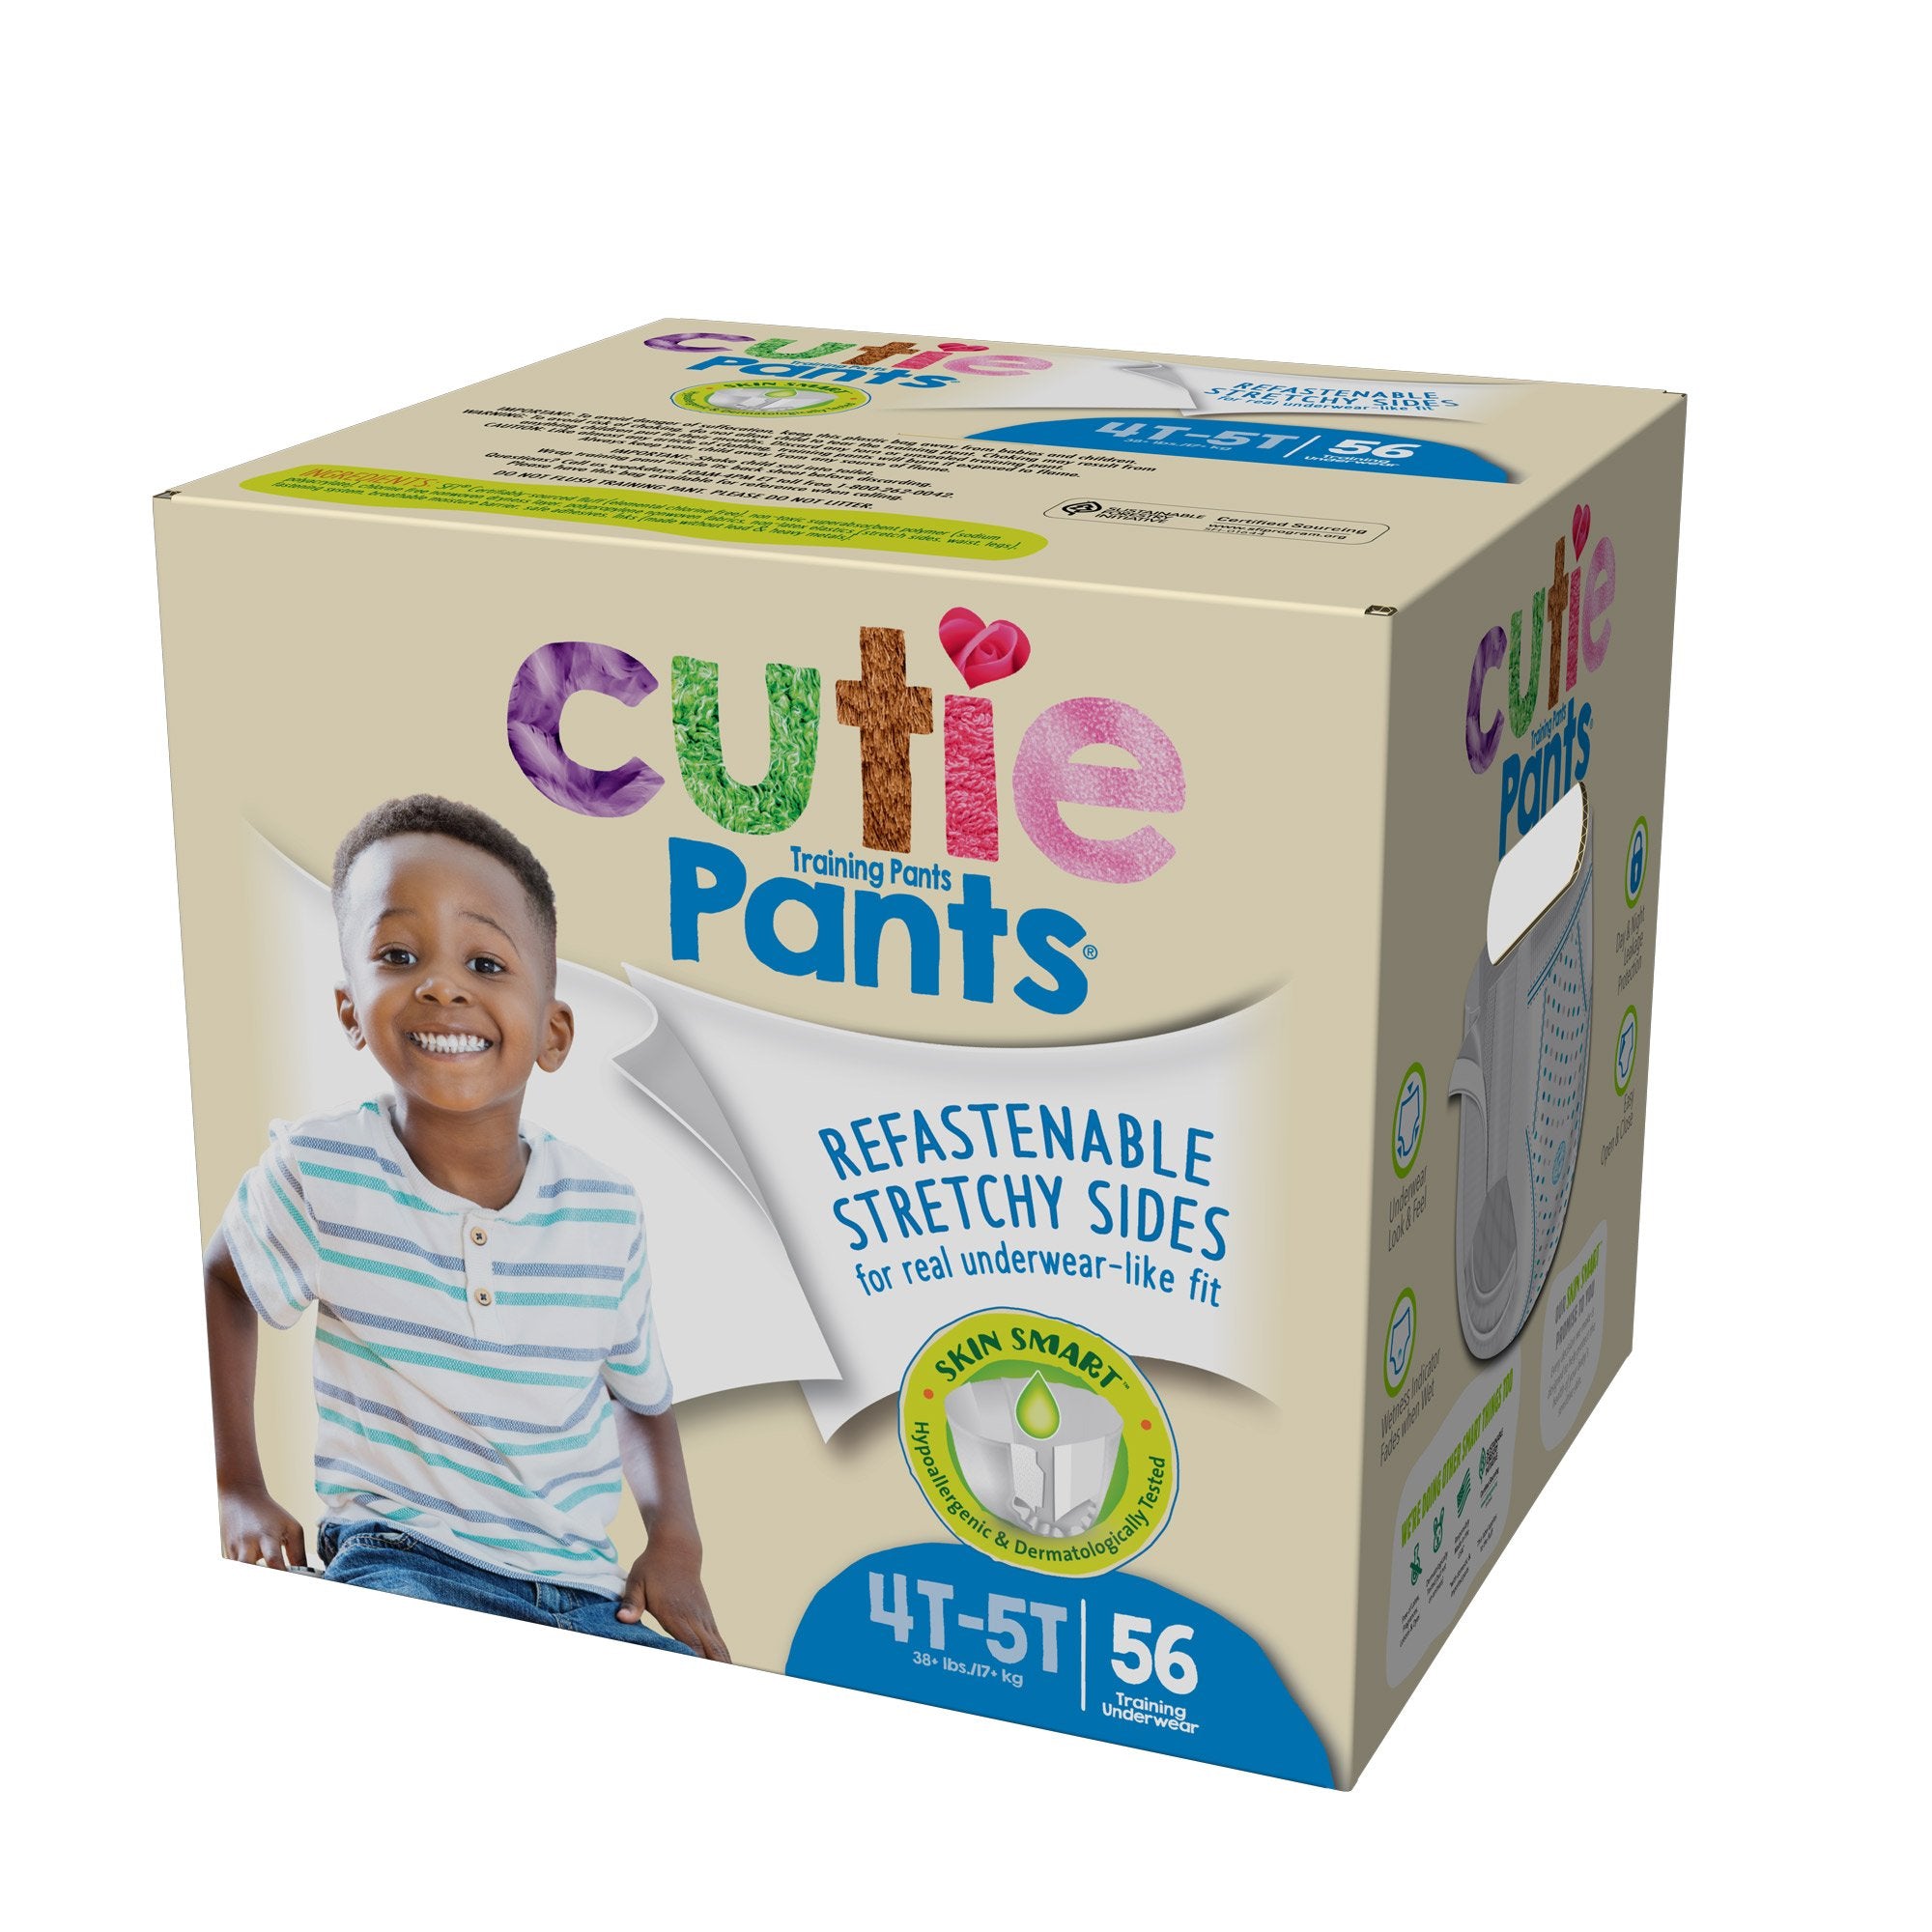  Cutie Boys 4T/5T Refastenable Potty Training Pants,  Hypoallergenic with Skin Smart, 76 Count White : Baby